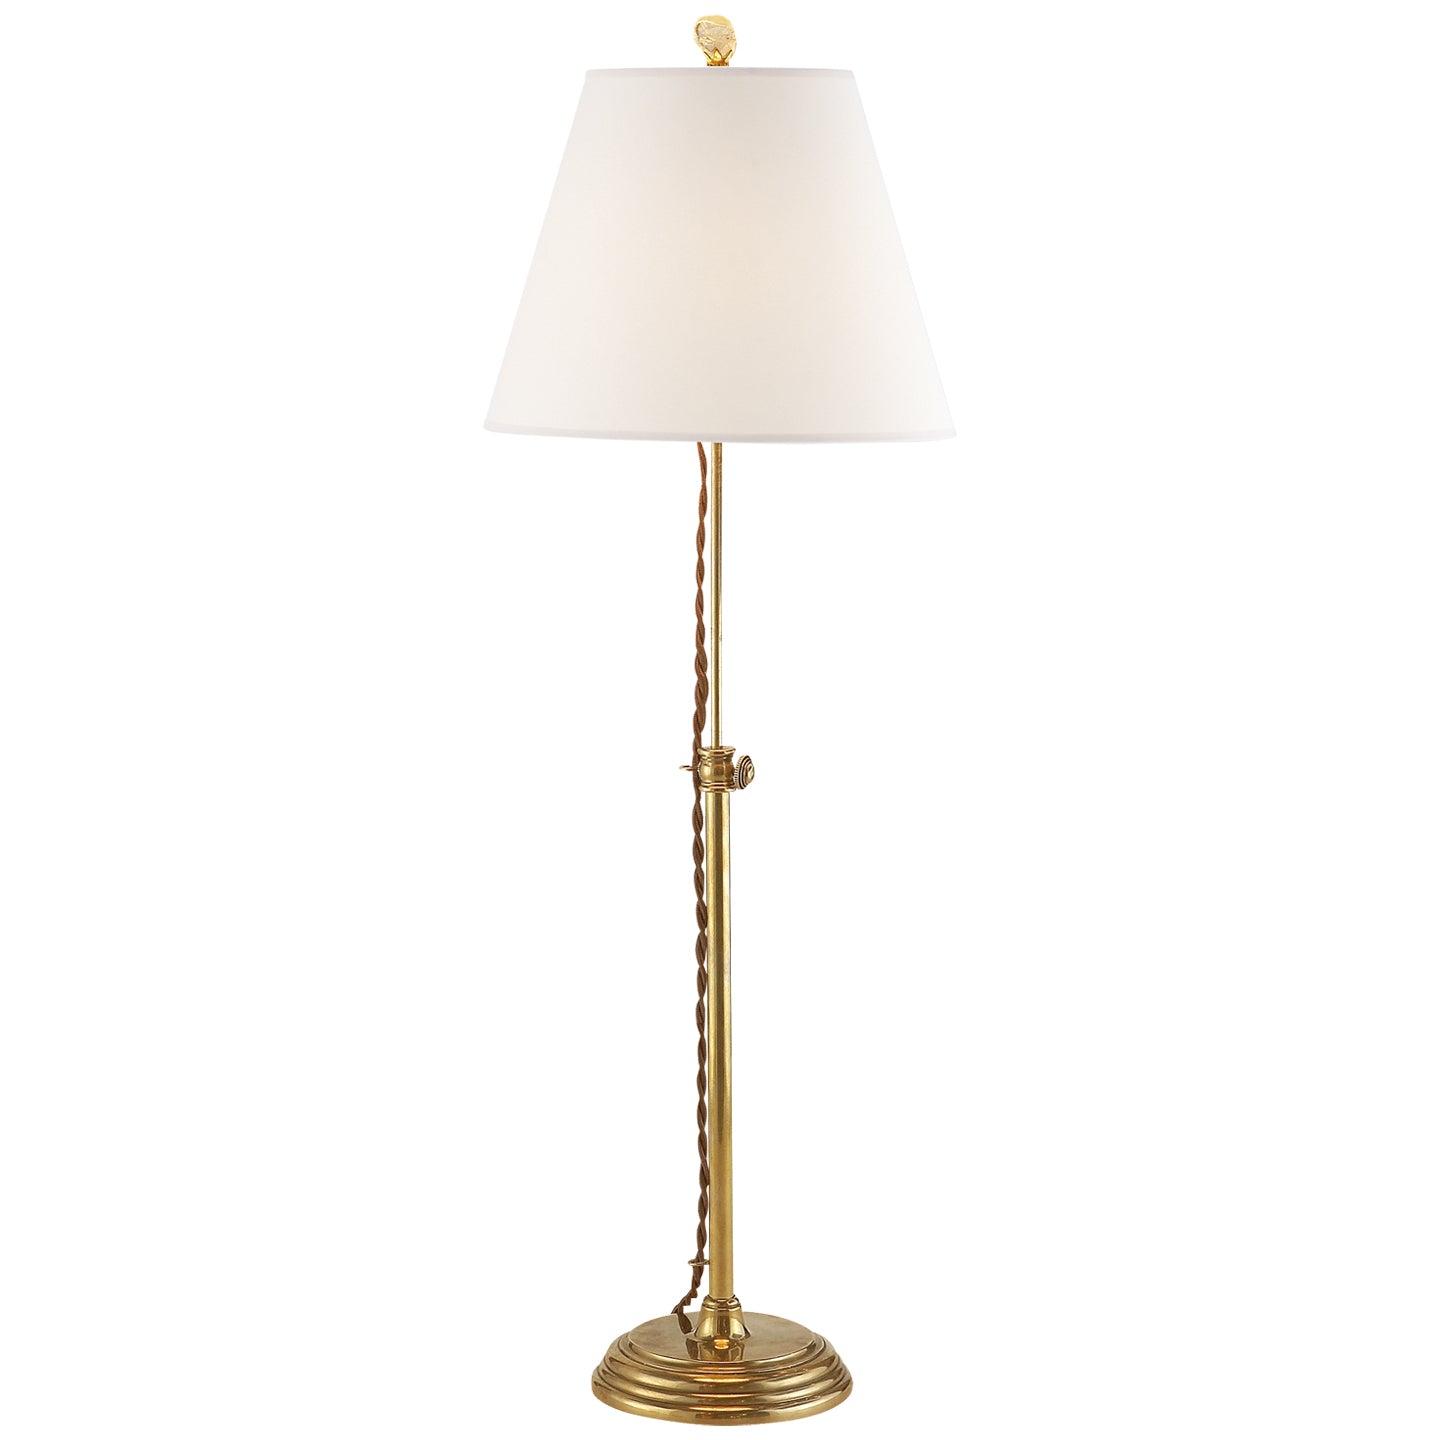 Load image into Gallery viewer, Visual Comfort Signature - SK 3005HAB-L - One Light Accent Lamp - Wyatt - Hand-Rubbed Antique Brass
